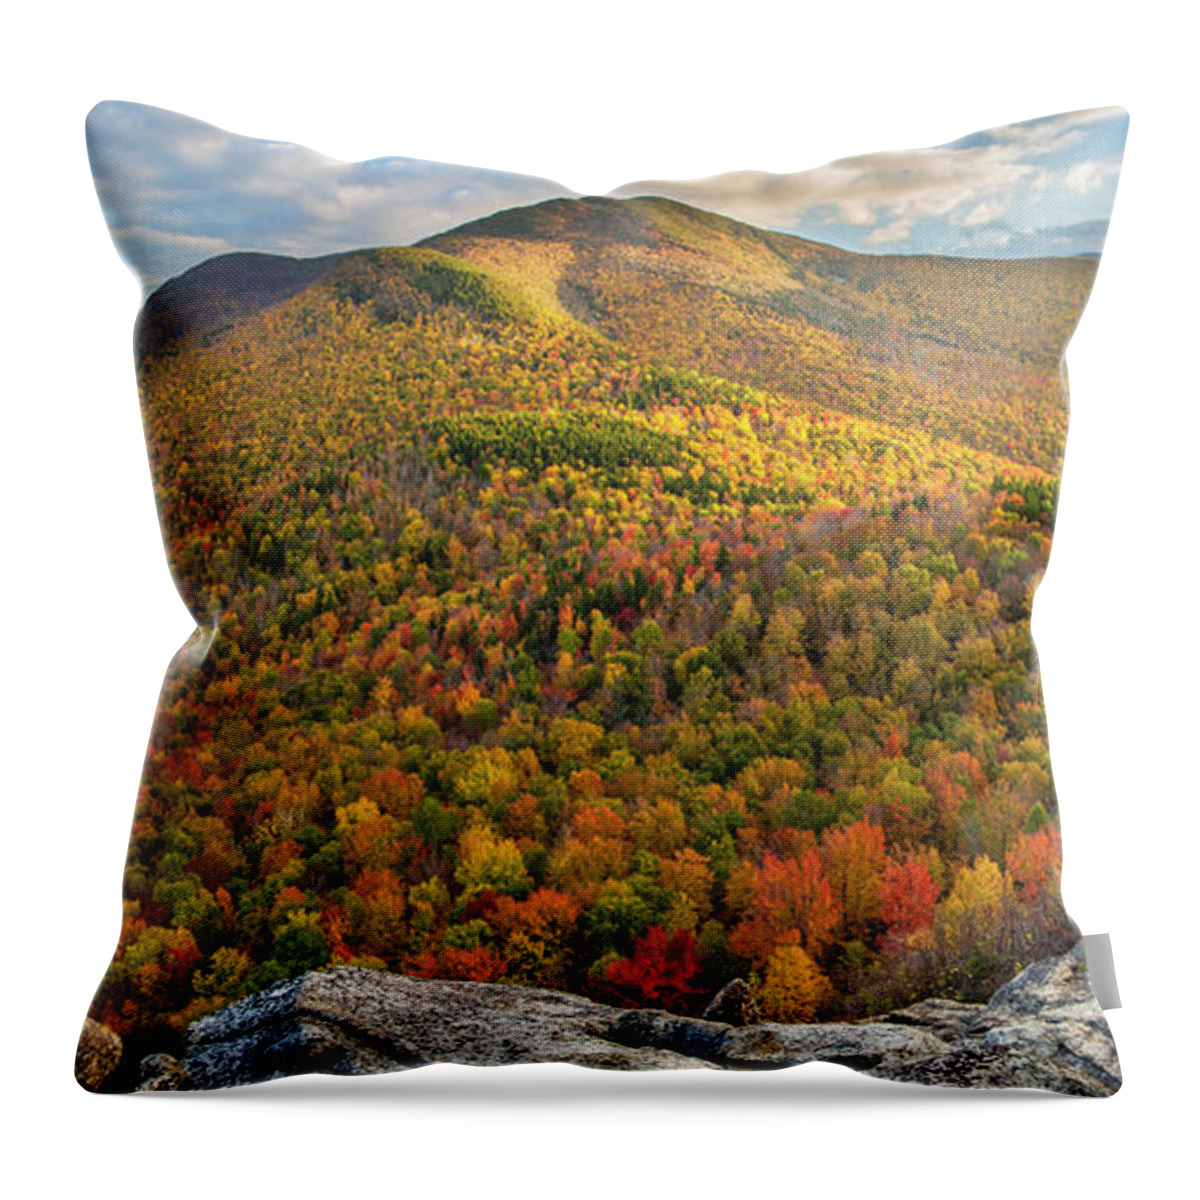 Middle Throw Pillow featuring the photograph Middle Sugarloaf Autumn Glow by White Mountain Images